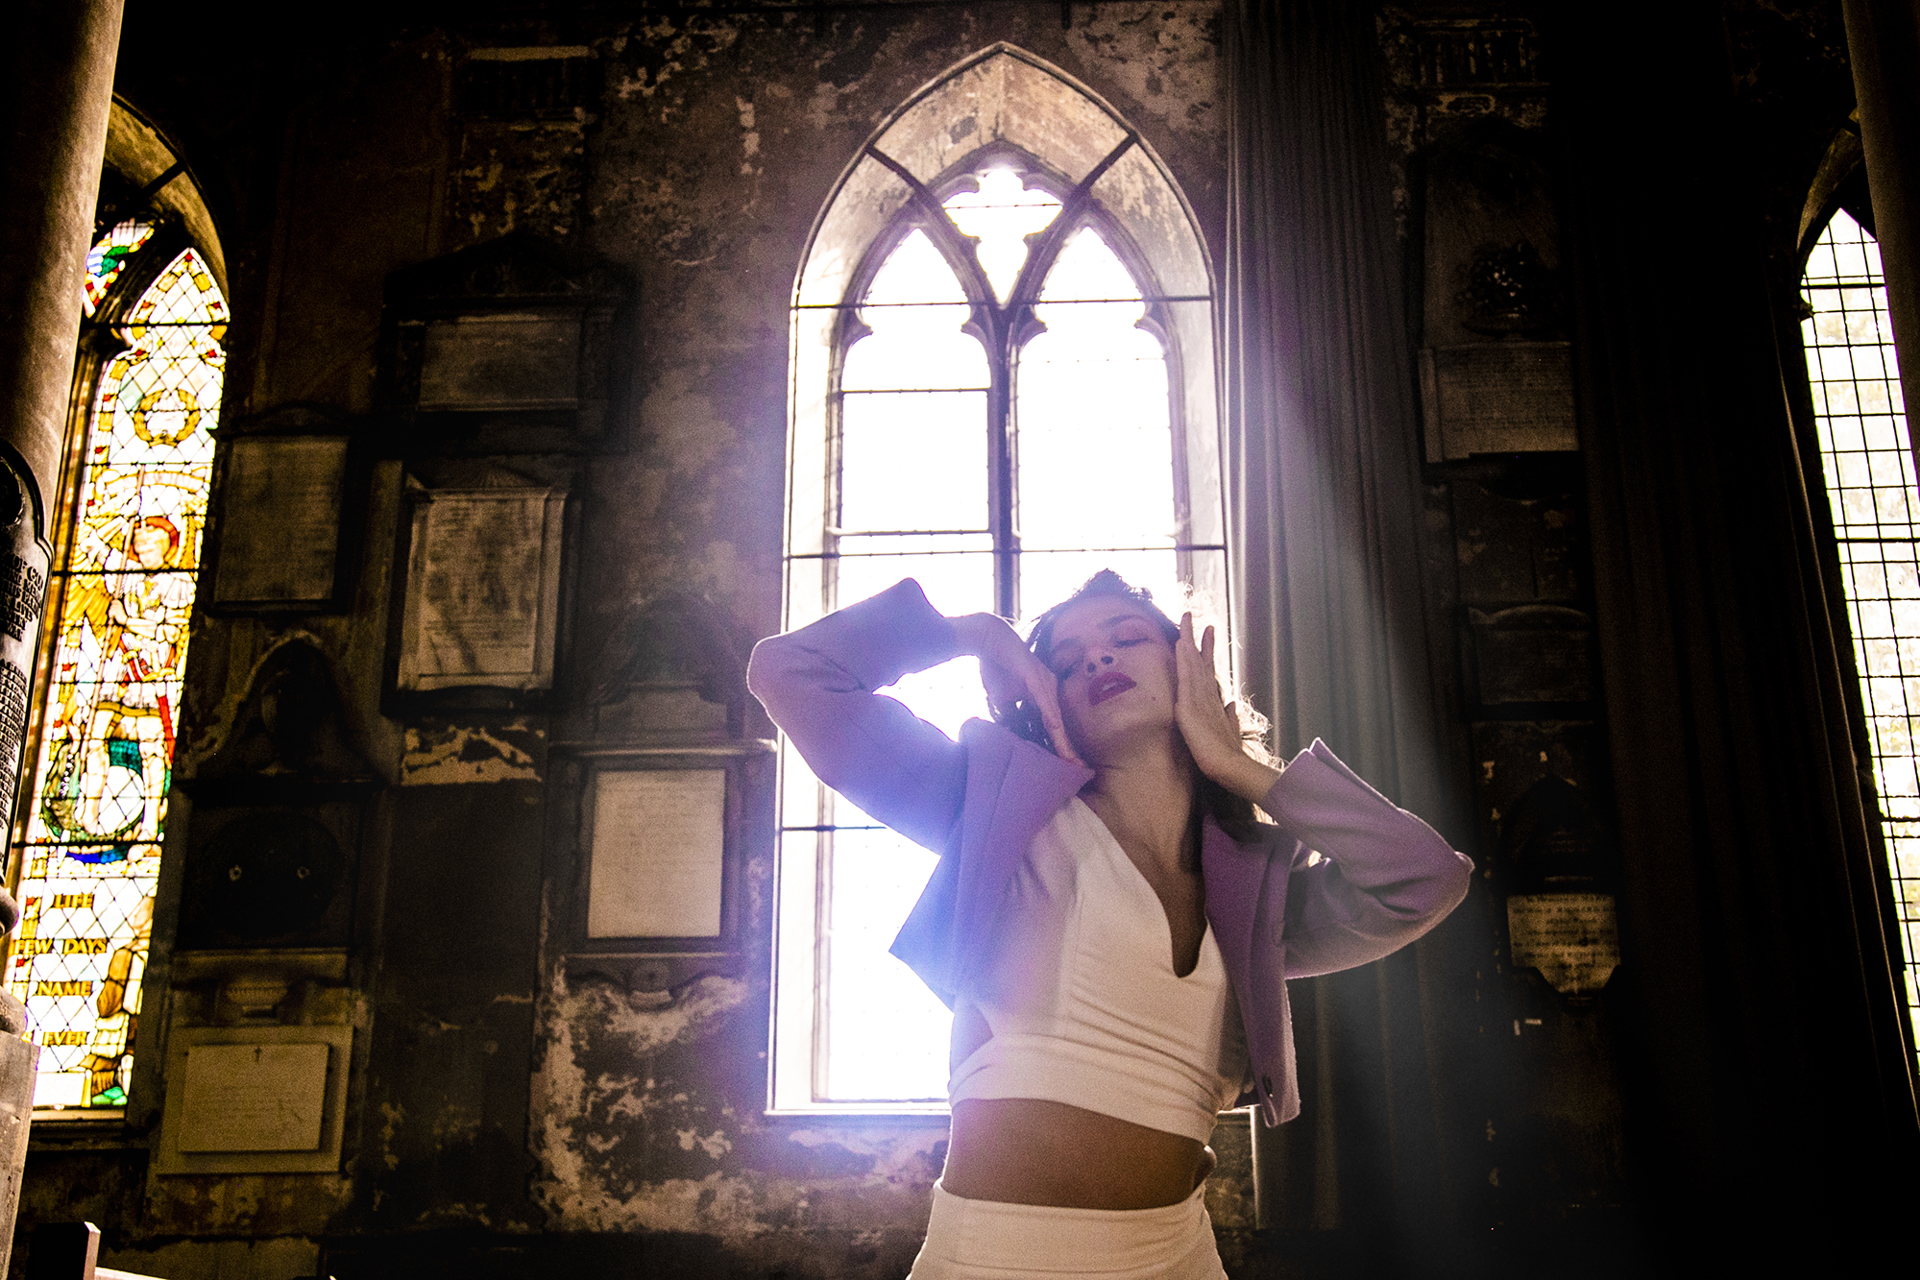 female dancer with hands around the face backlit by church window. Wearing white jumpsuit and purple jacket